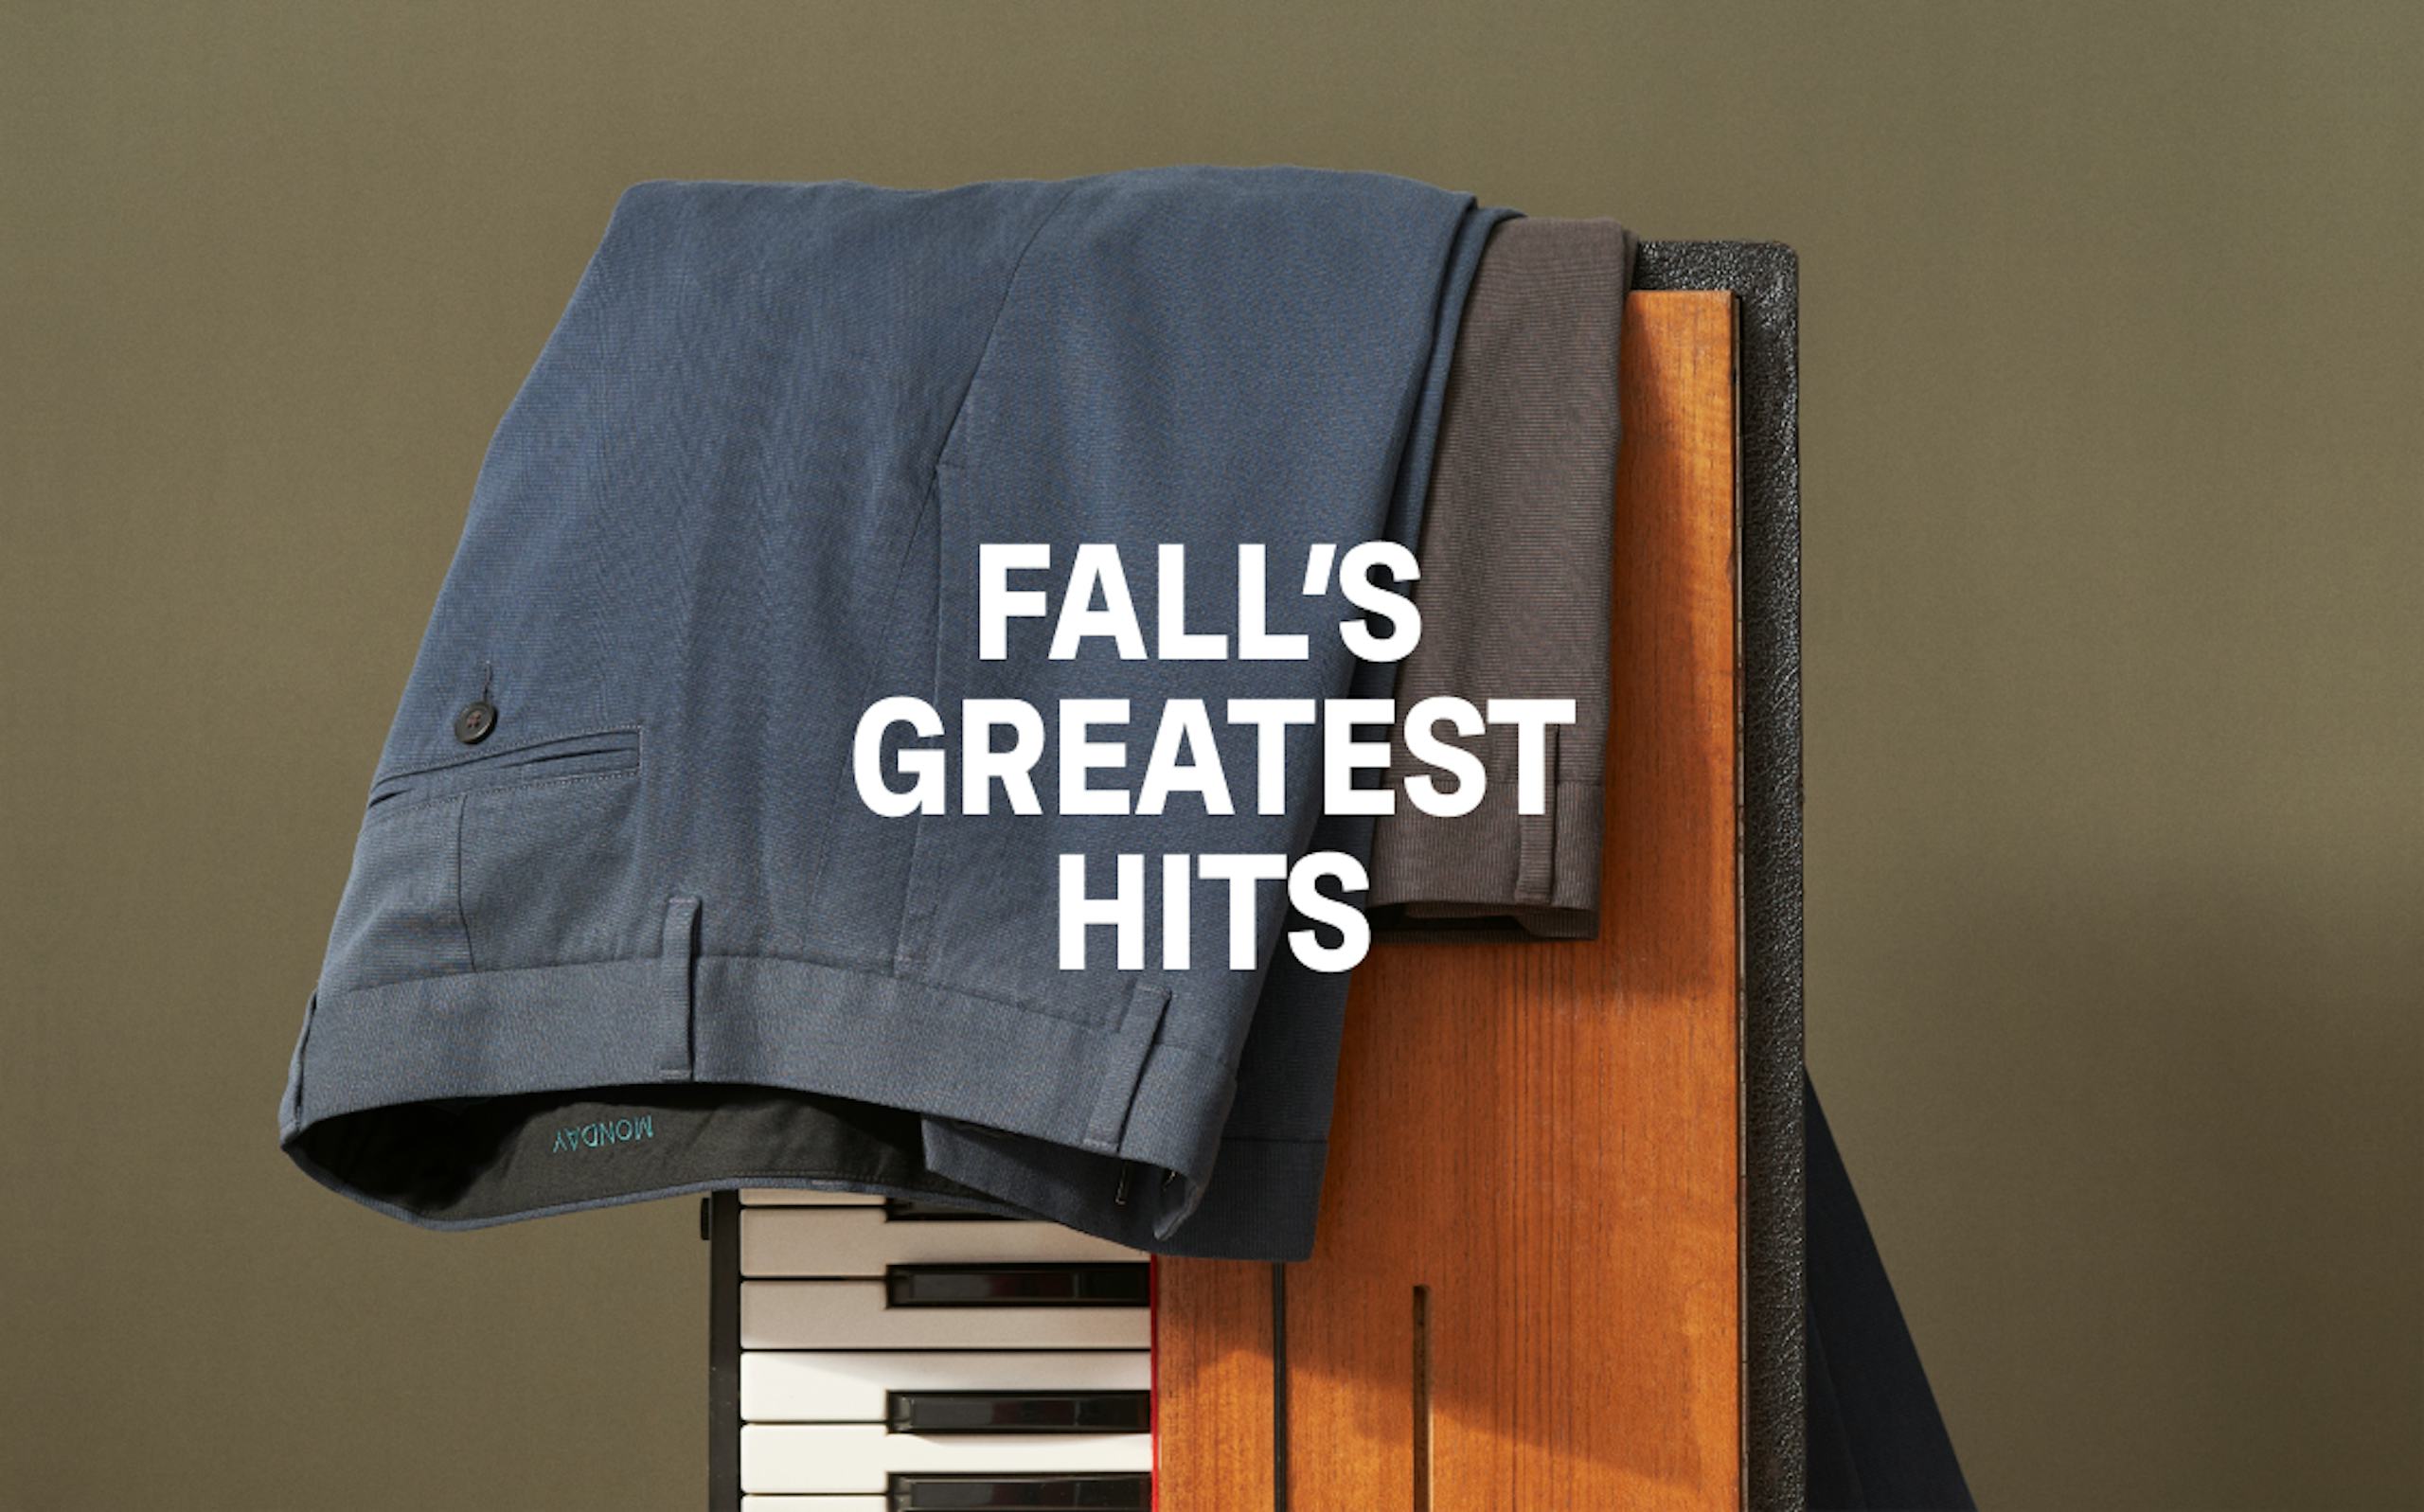 Fall's Greatest Hits